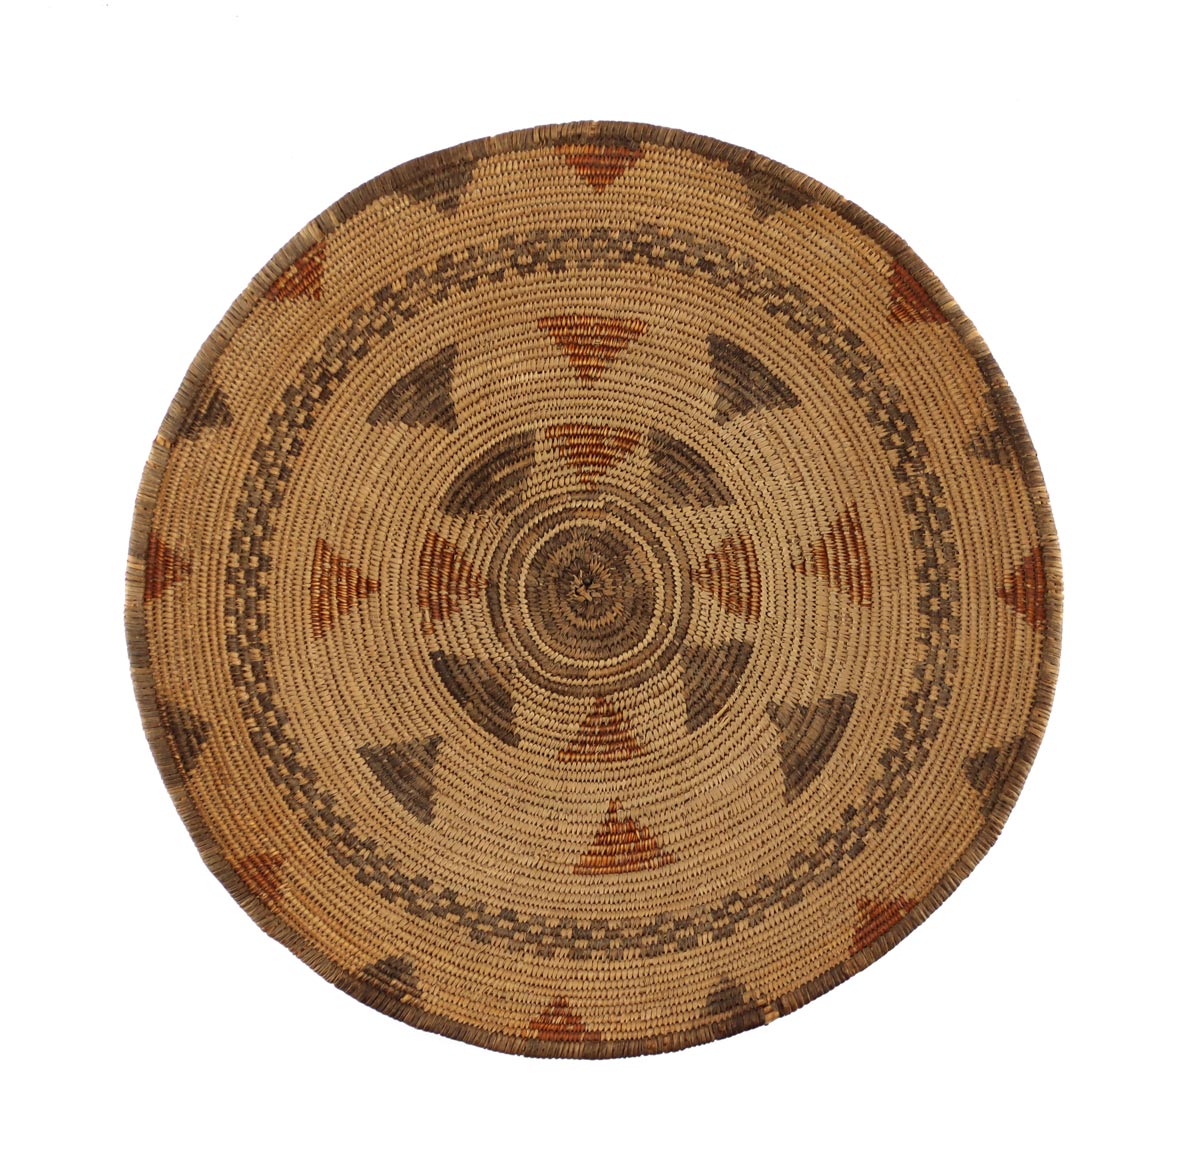 Apache Polychrome Tray with Rattlesnake Design c. 1890s, 3.5" x 15.25"